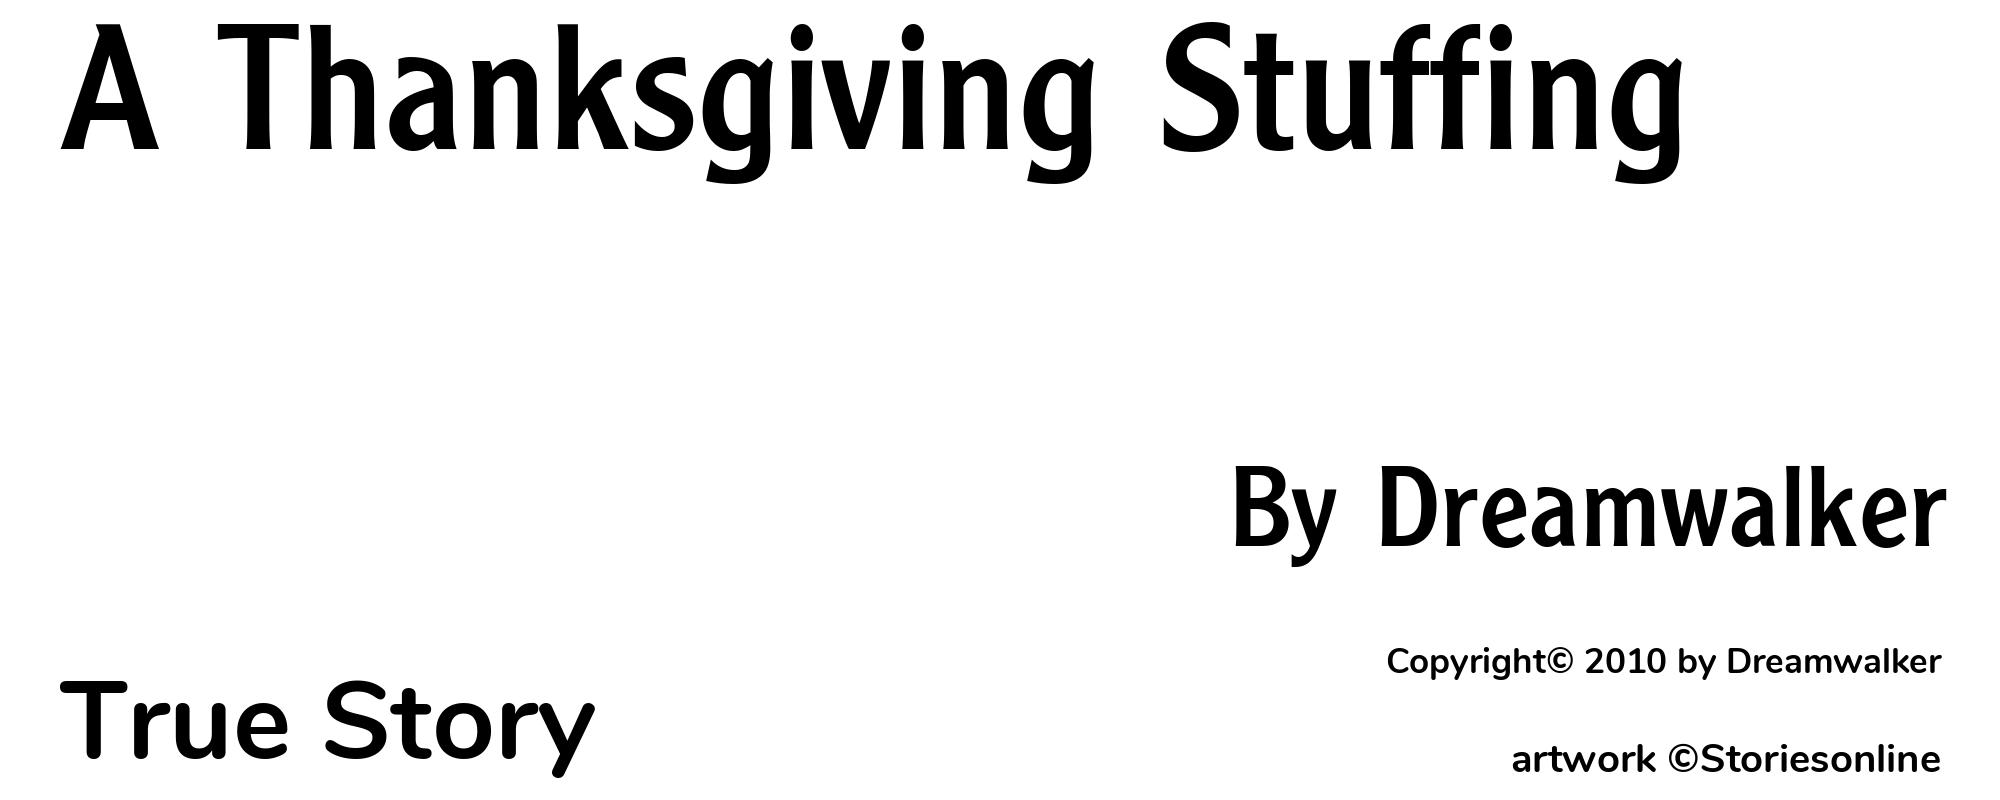 A Thanksgiving Stuffing - Cover